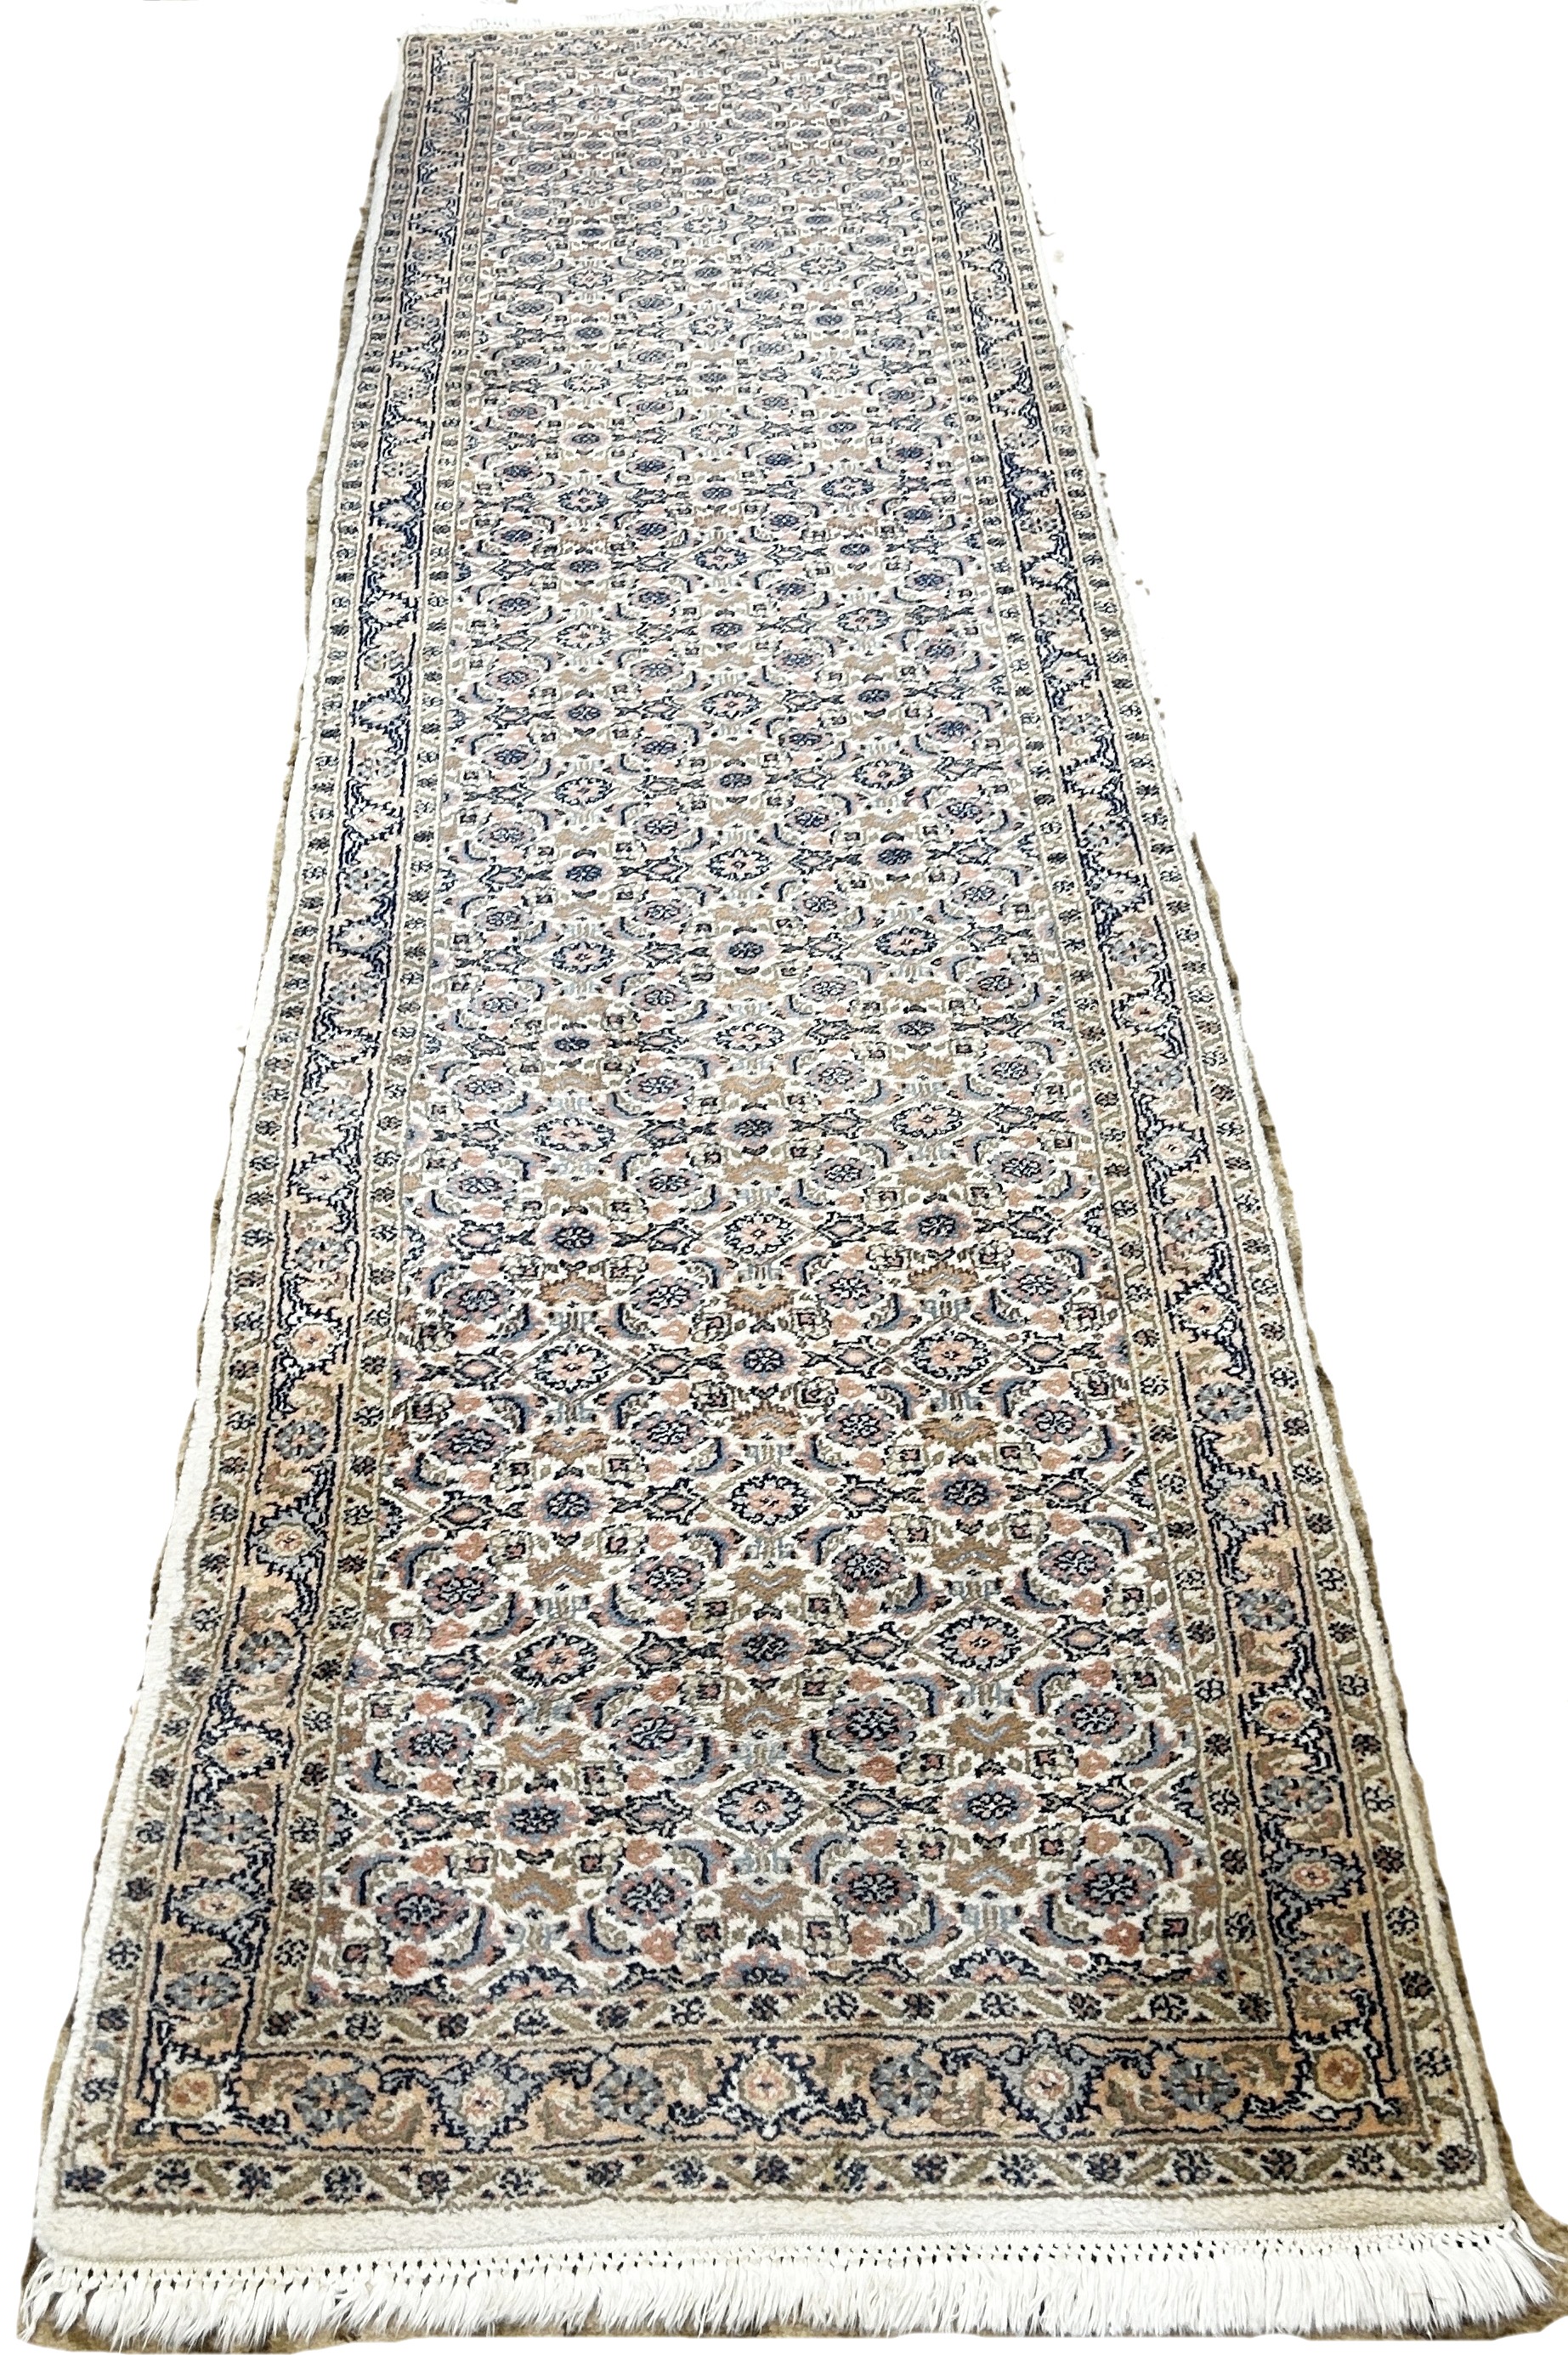 A Persian Kashan Runner with a tightly packed all over floral pattern, 315cm x 80cm approximately - Image 2 of 2